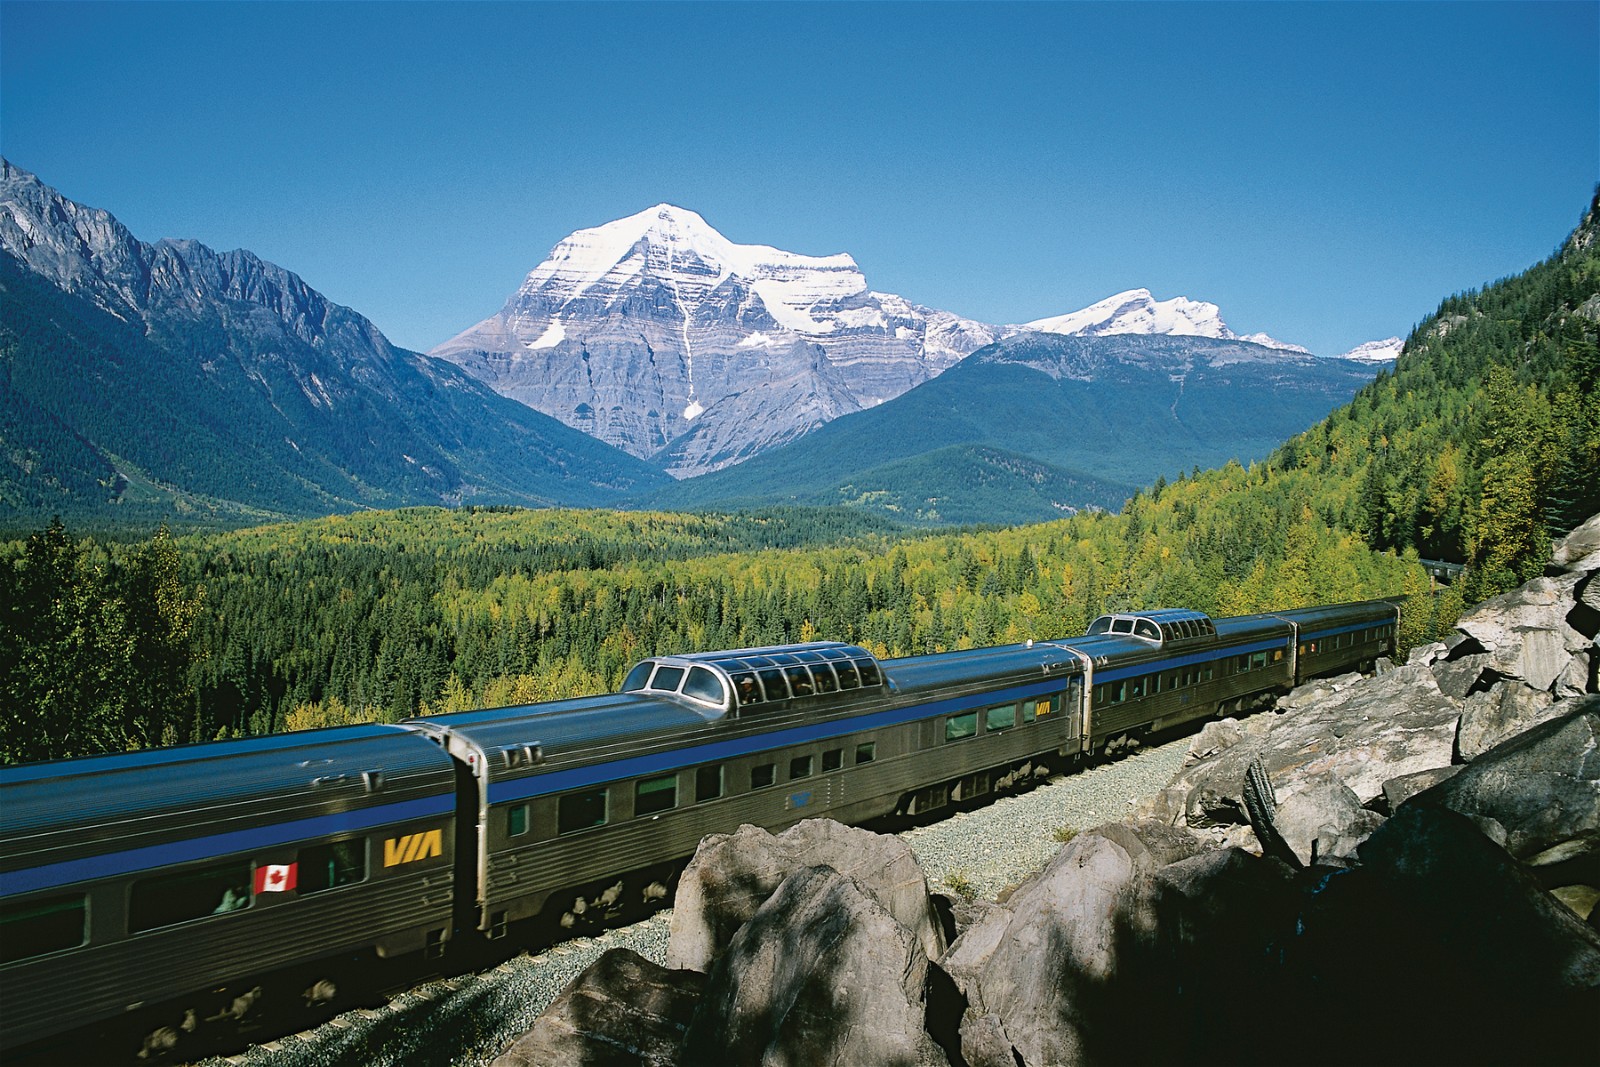 The Canadian train offers three classes of service: Prestige Class, Sleeper Plus Class, and Economy Class.